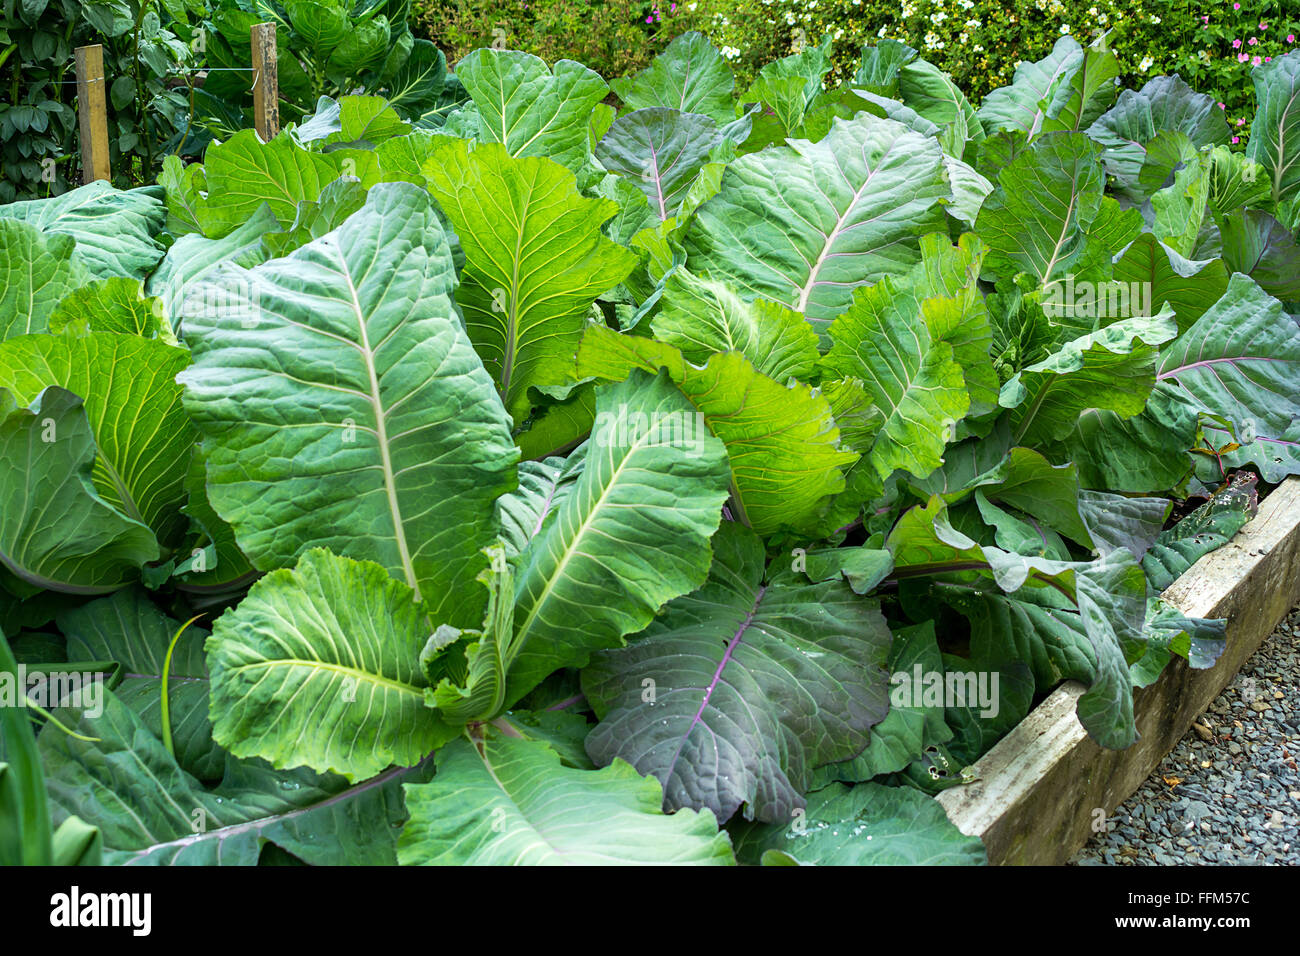 Cabbage growing in the garden close up Stock Photo